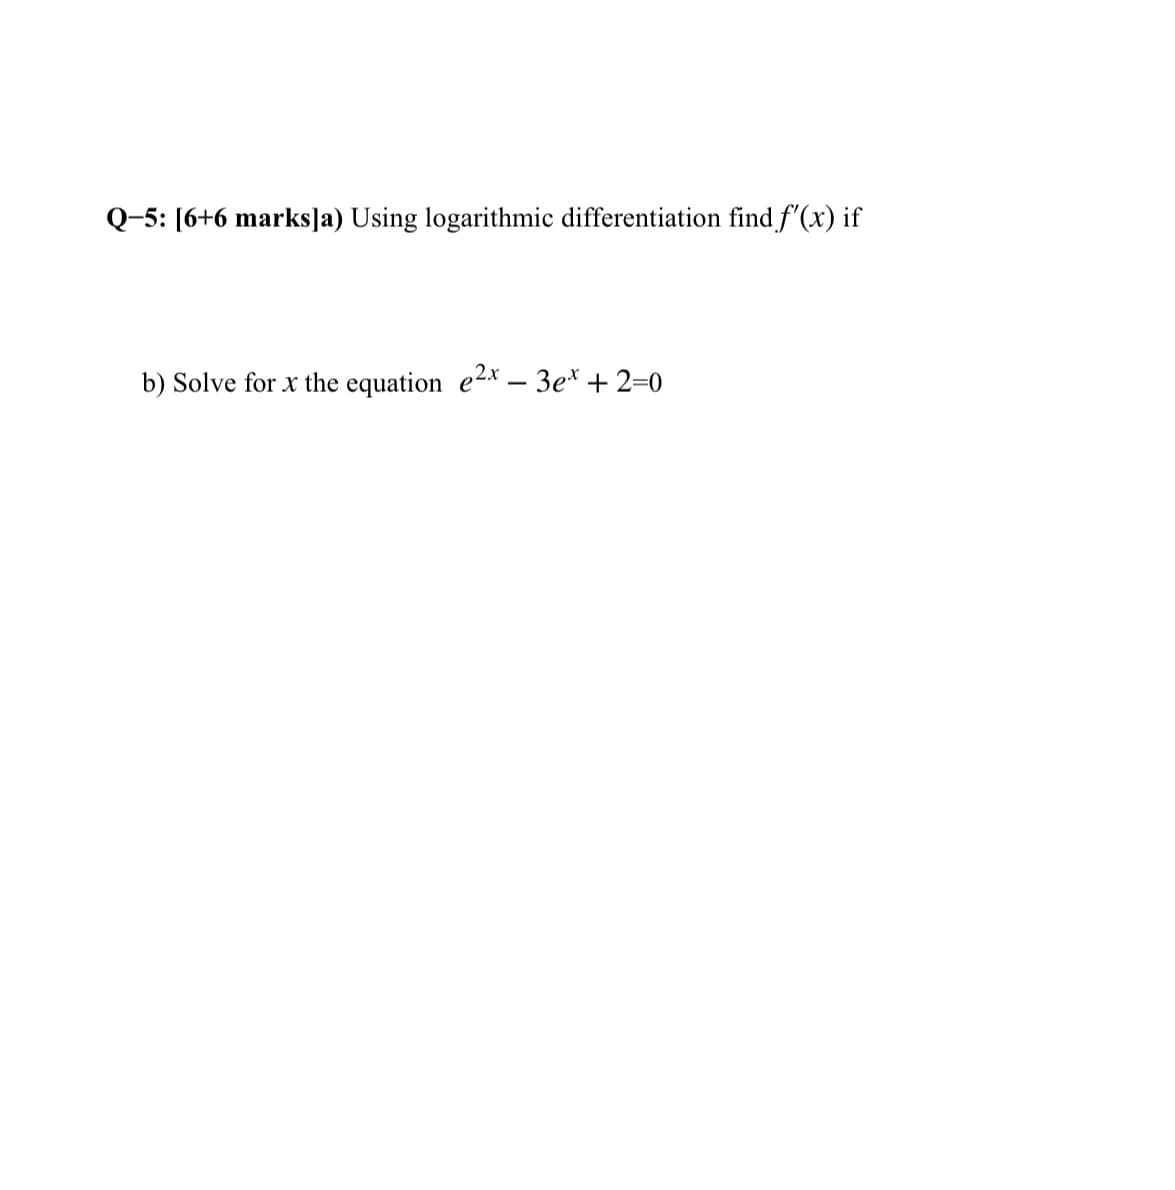 Q-5: [6+6 marks]a) Using logarithmic differentiation find f'(x) if
b) Solve for x the equation e2x-3e* +2=0